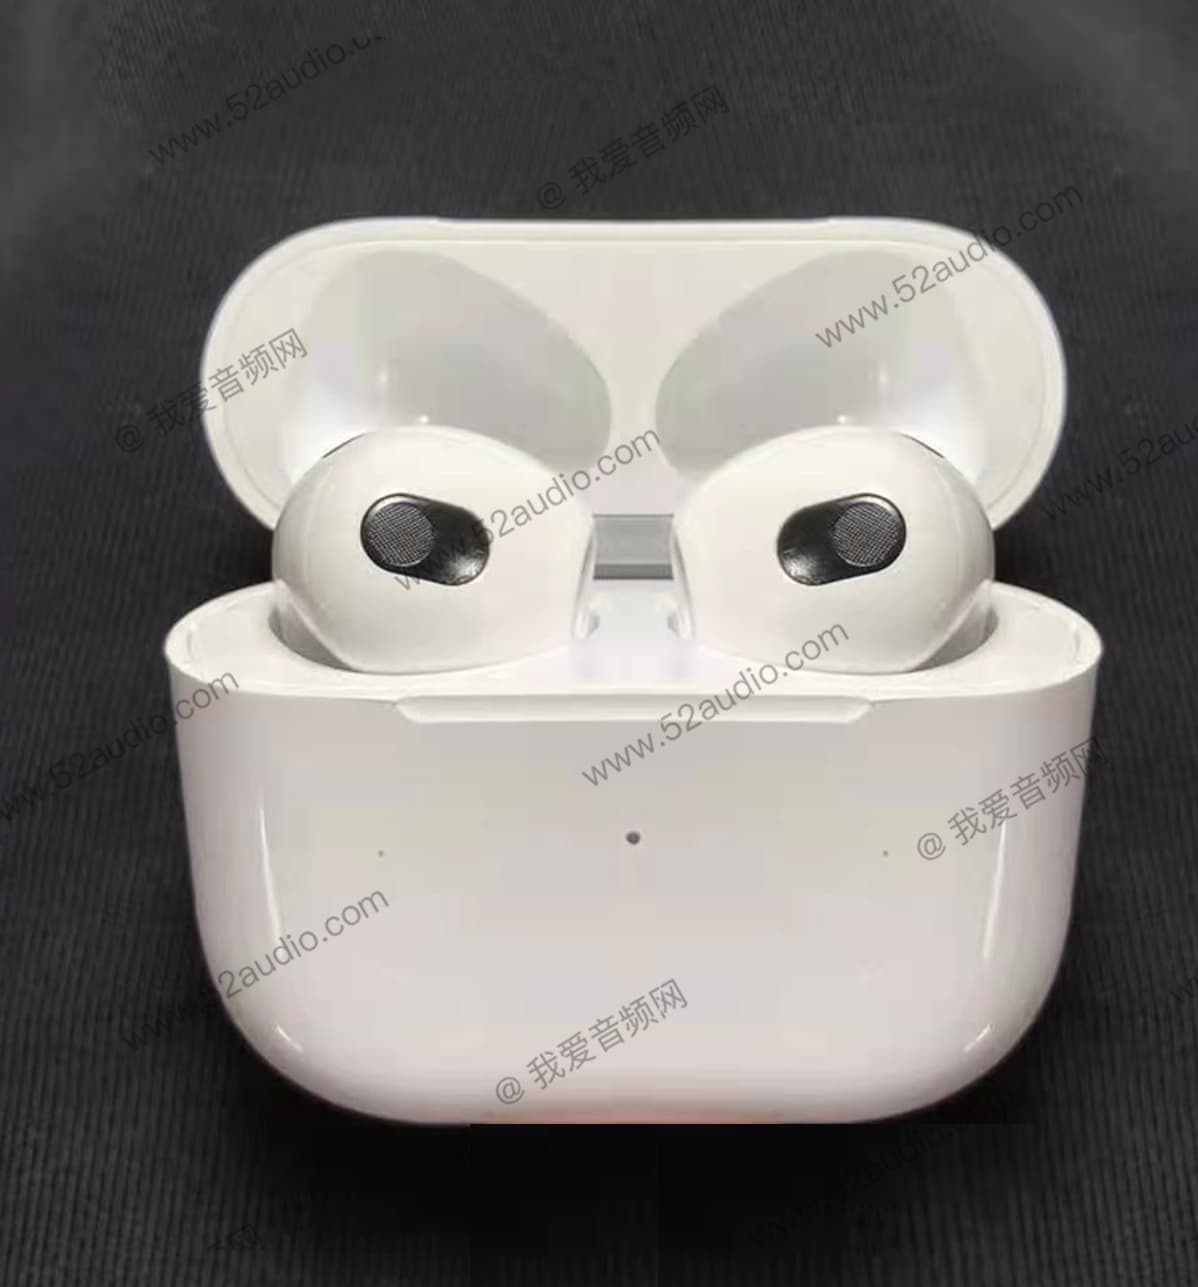 AirPods 3 實體諜照曝光，外型、規格與售價總整理2